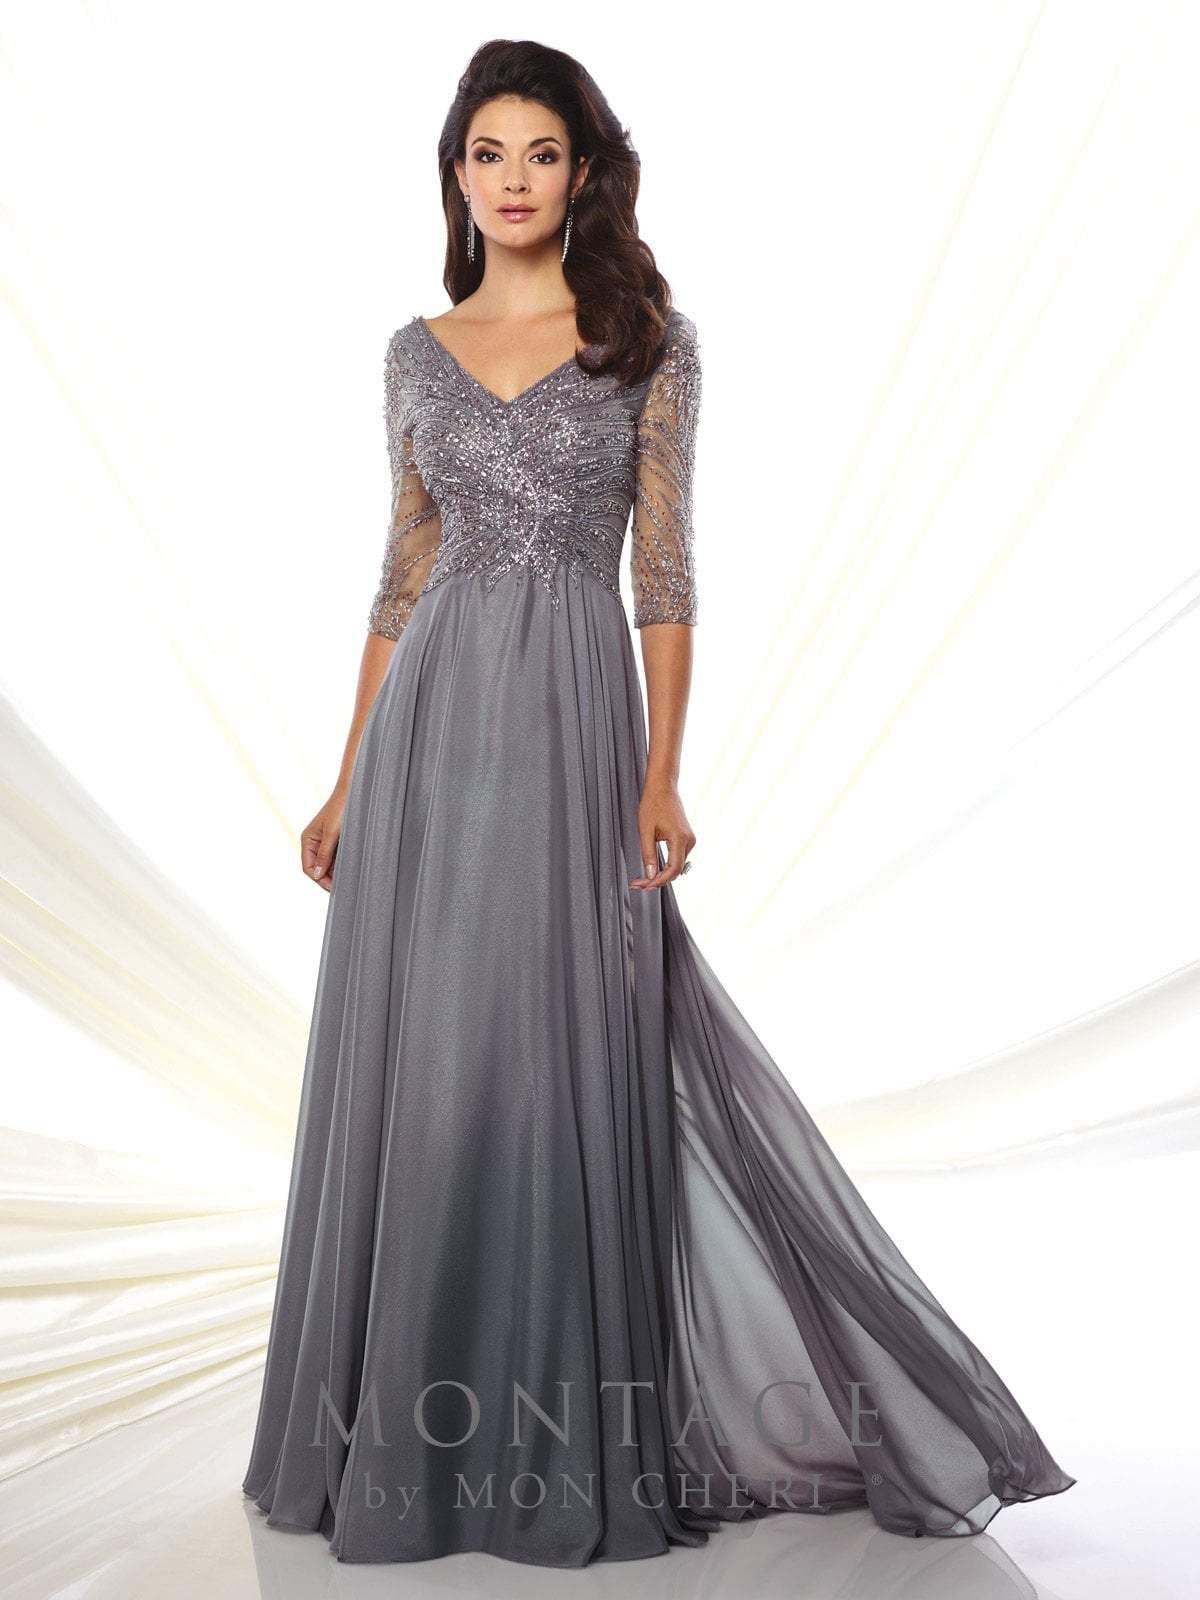 Montage by Mon Cheri - 116950W Chiffon A-line Dress- 1 pc Gray/Heather in Size 26W Available CCSALE 16W / Gray/Heather